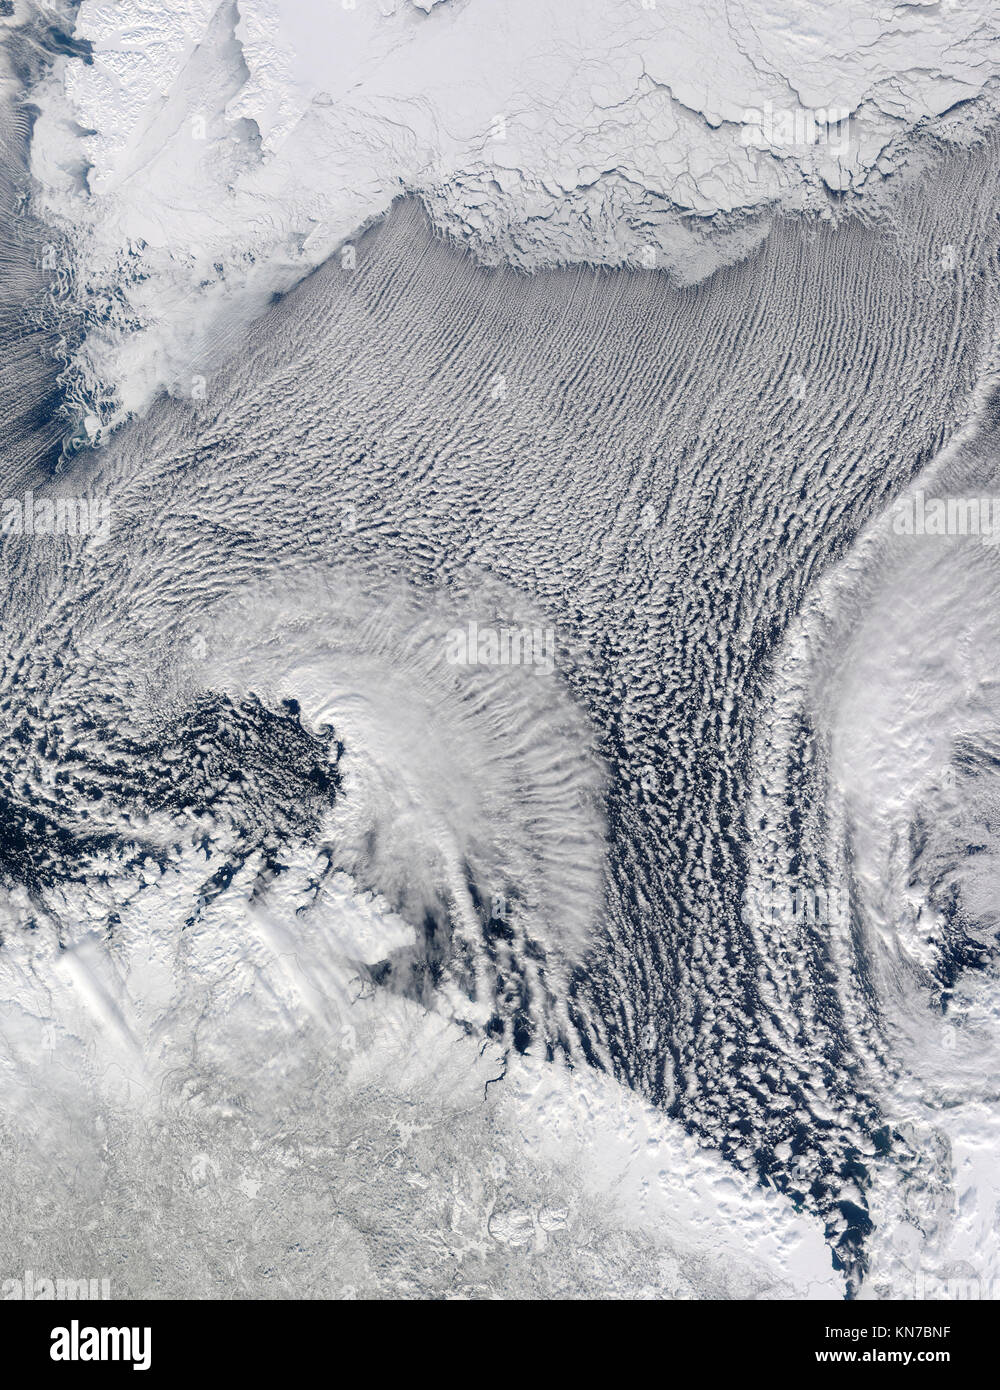 Cloud patterns in the Barents Sea Stock Photo